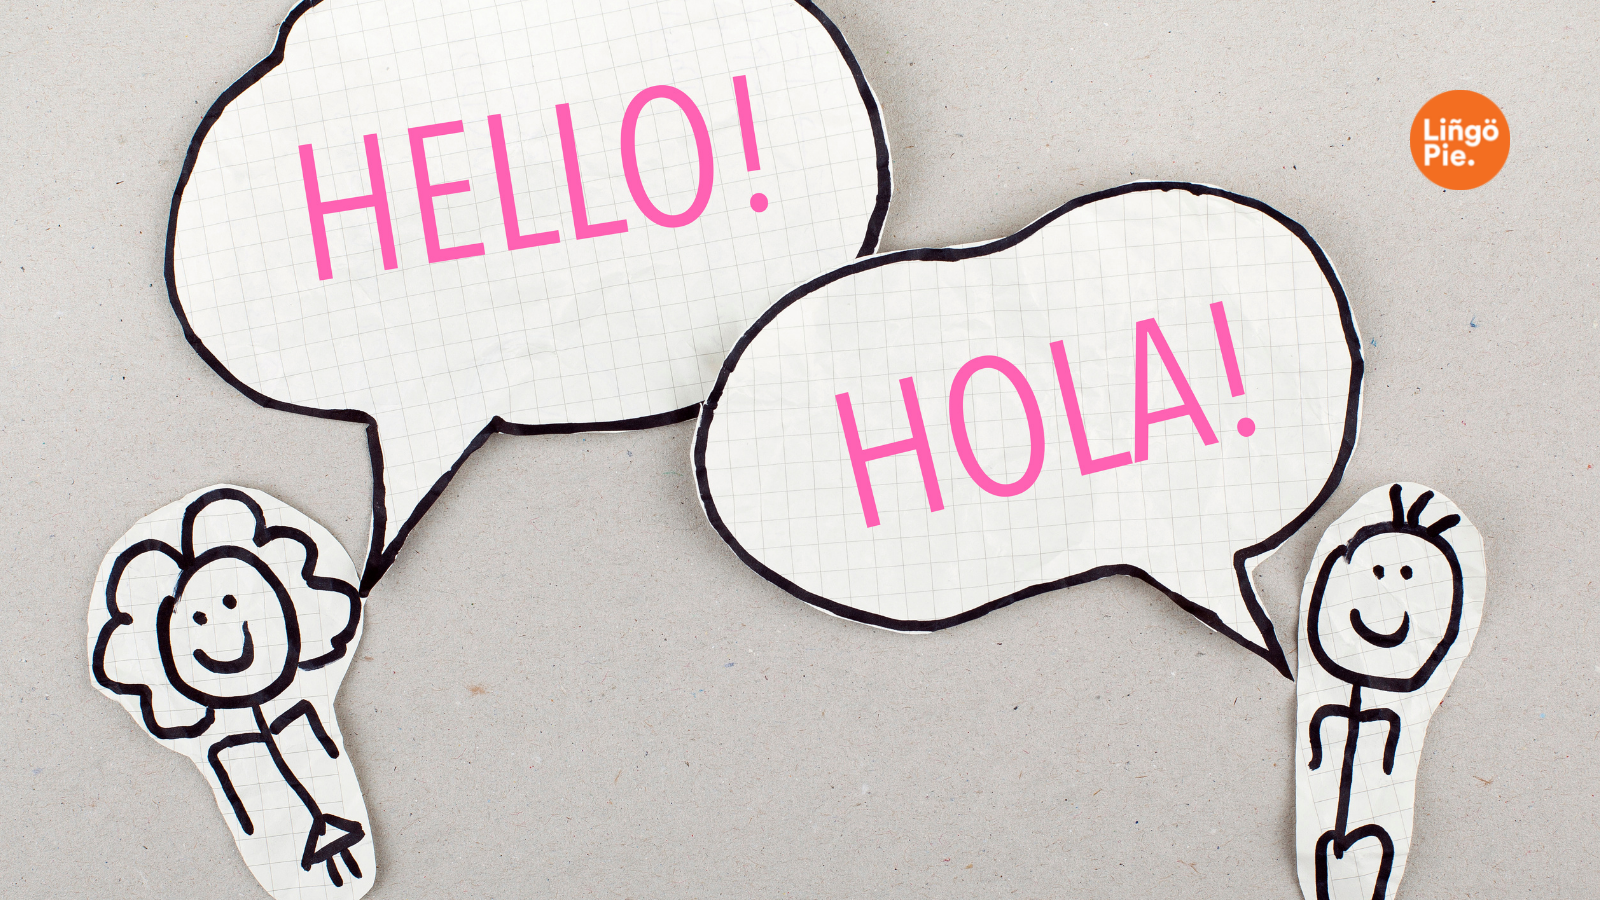 Spanish VS English: 11 Surprising Differences Between Spanish and English